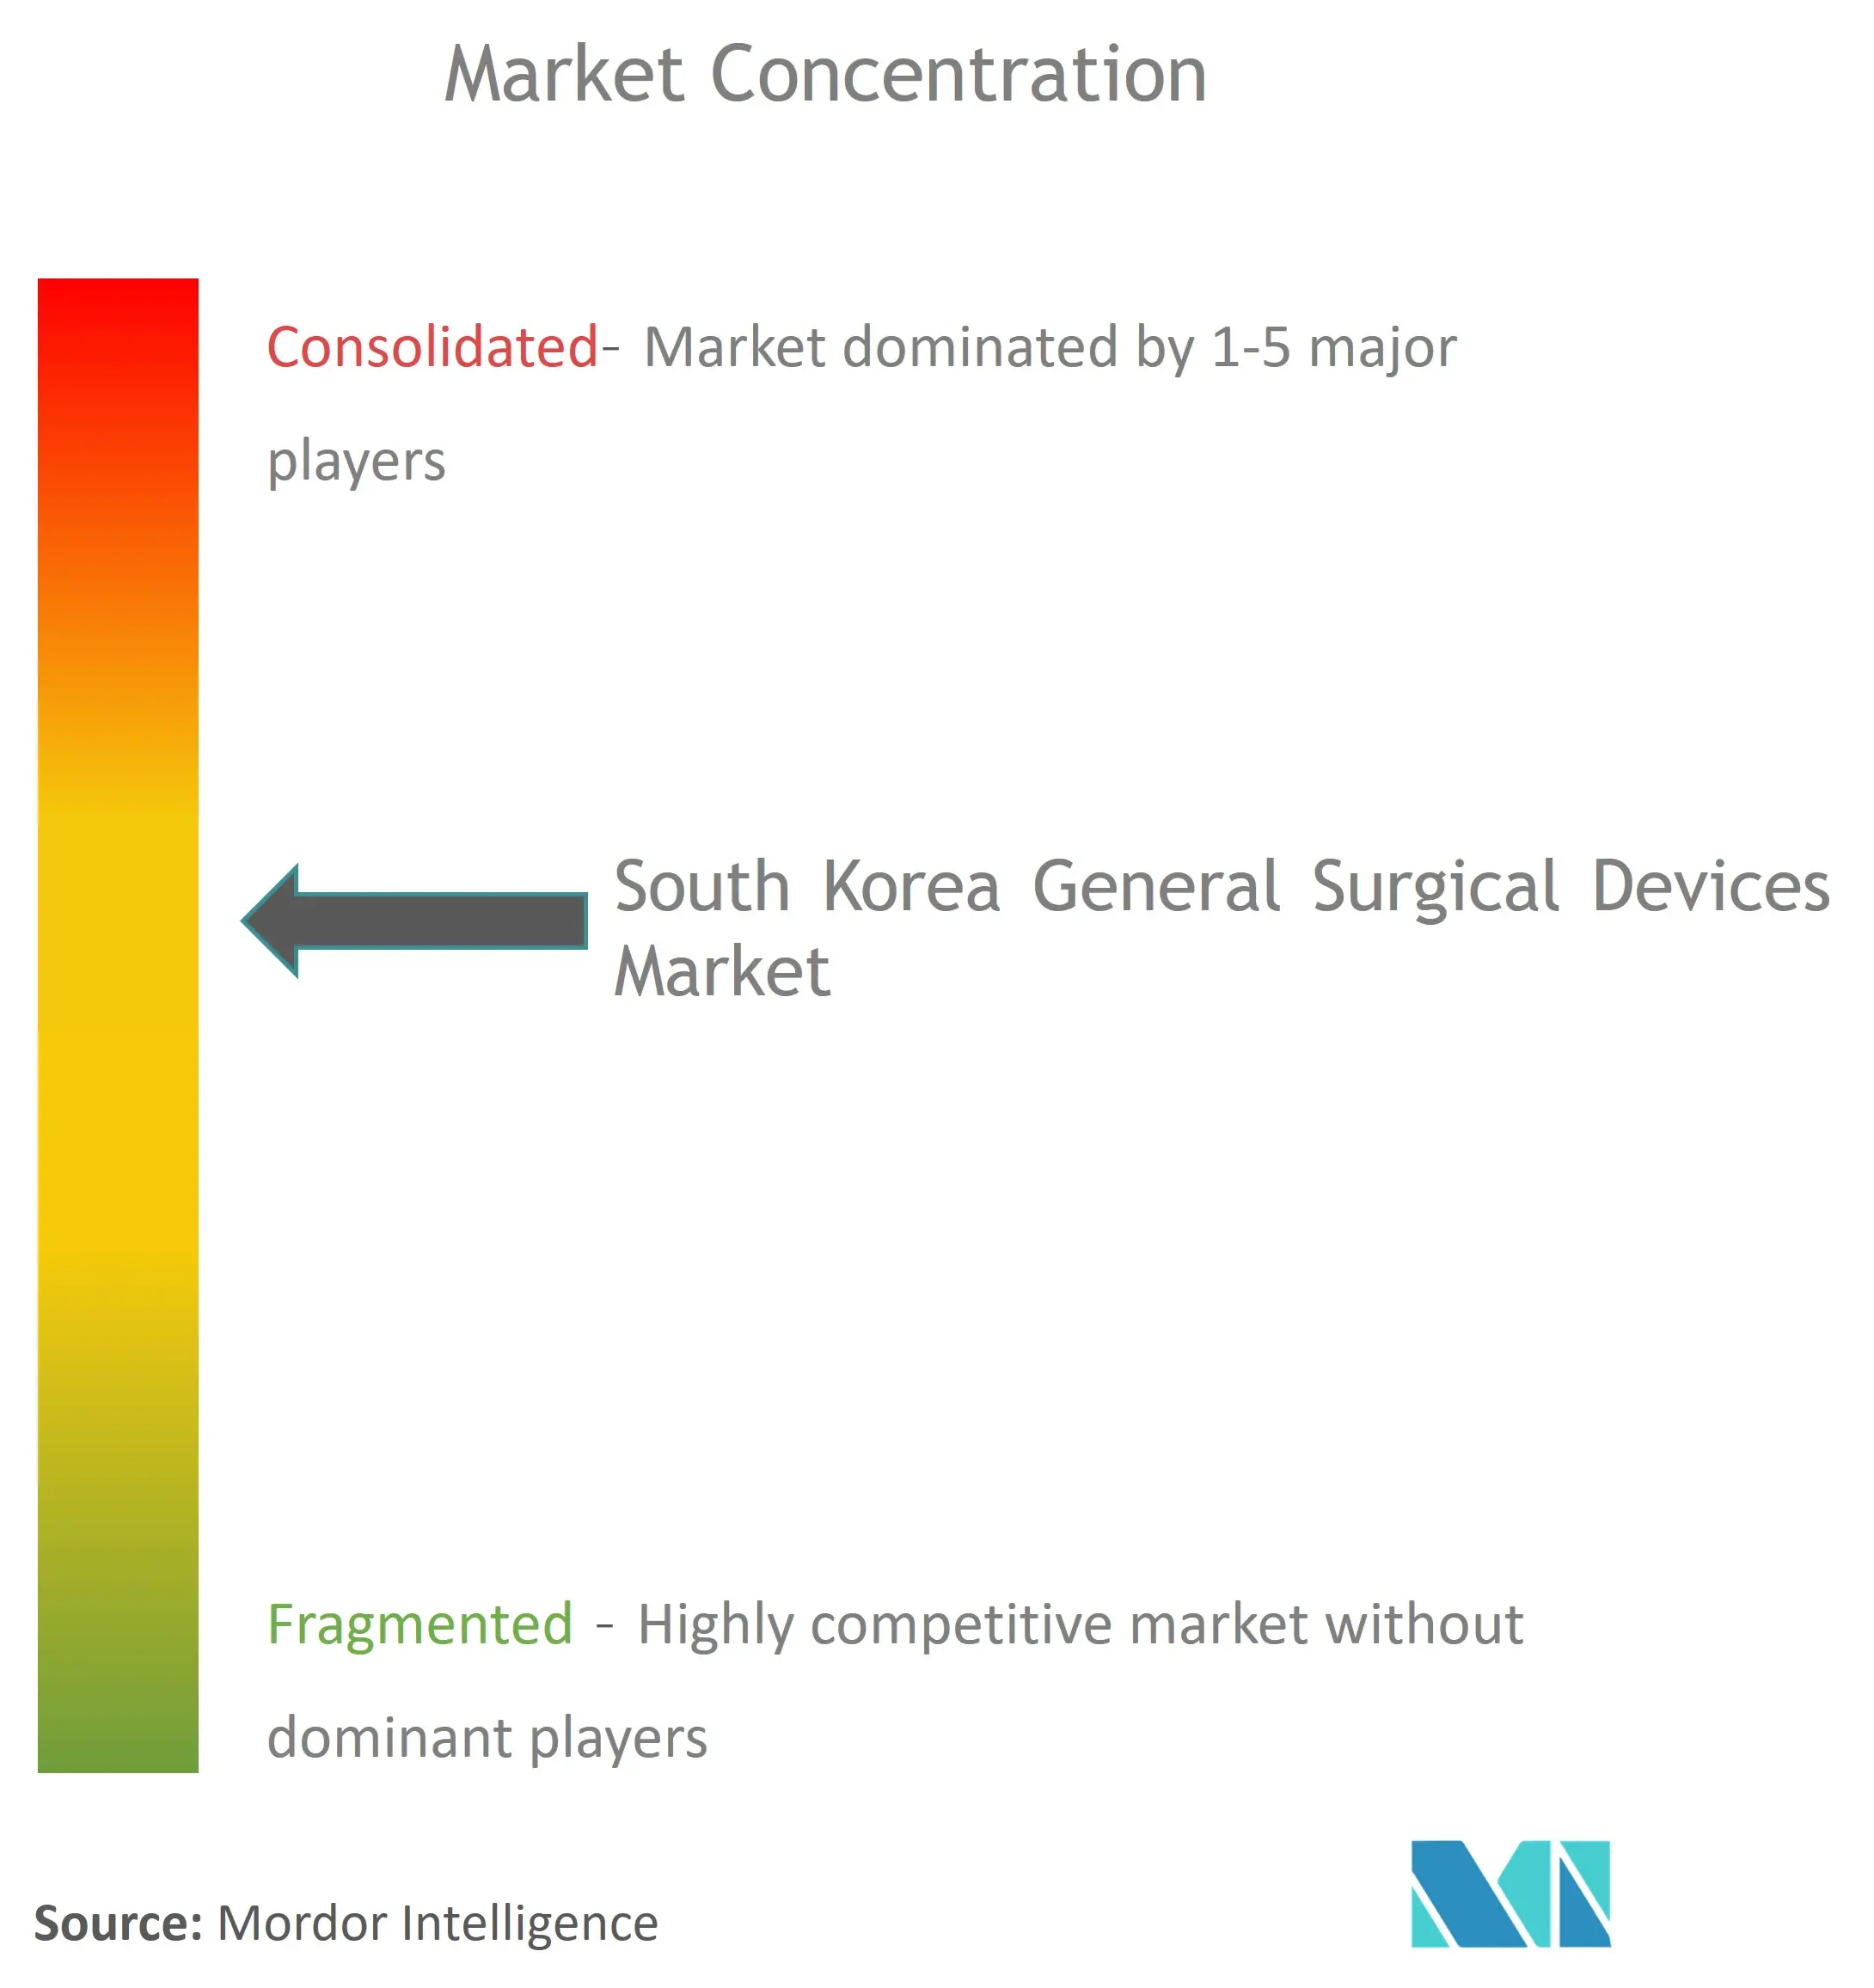 South Korea General Surgical Devices Market Concentration.png